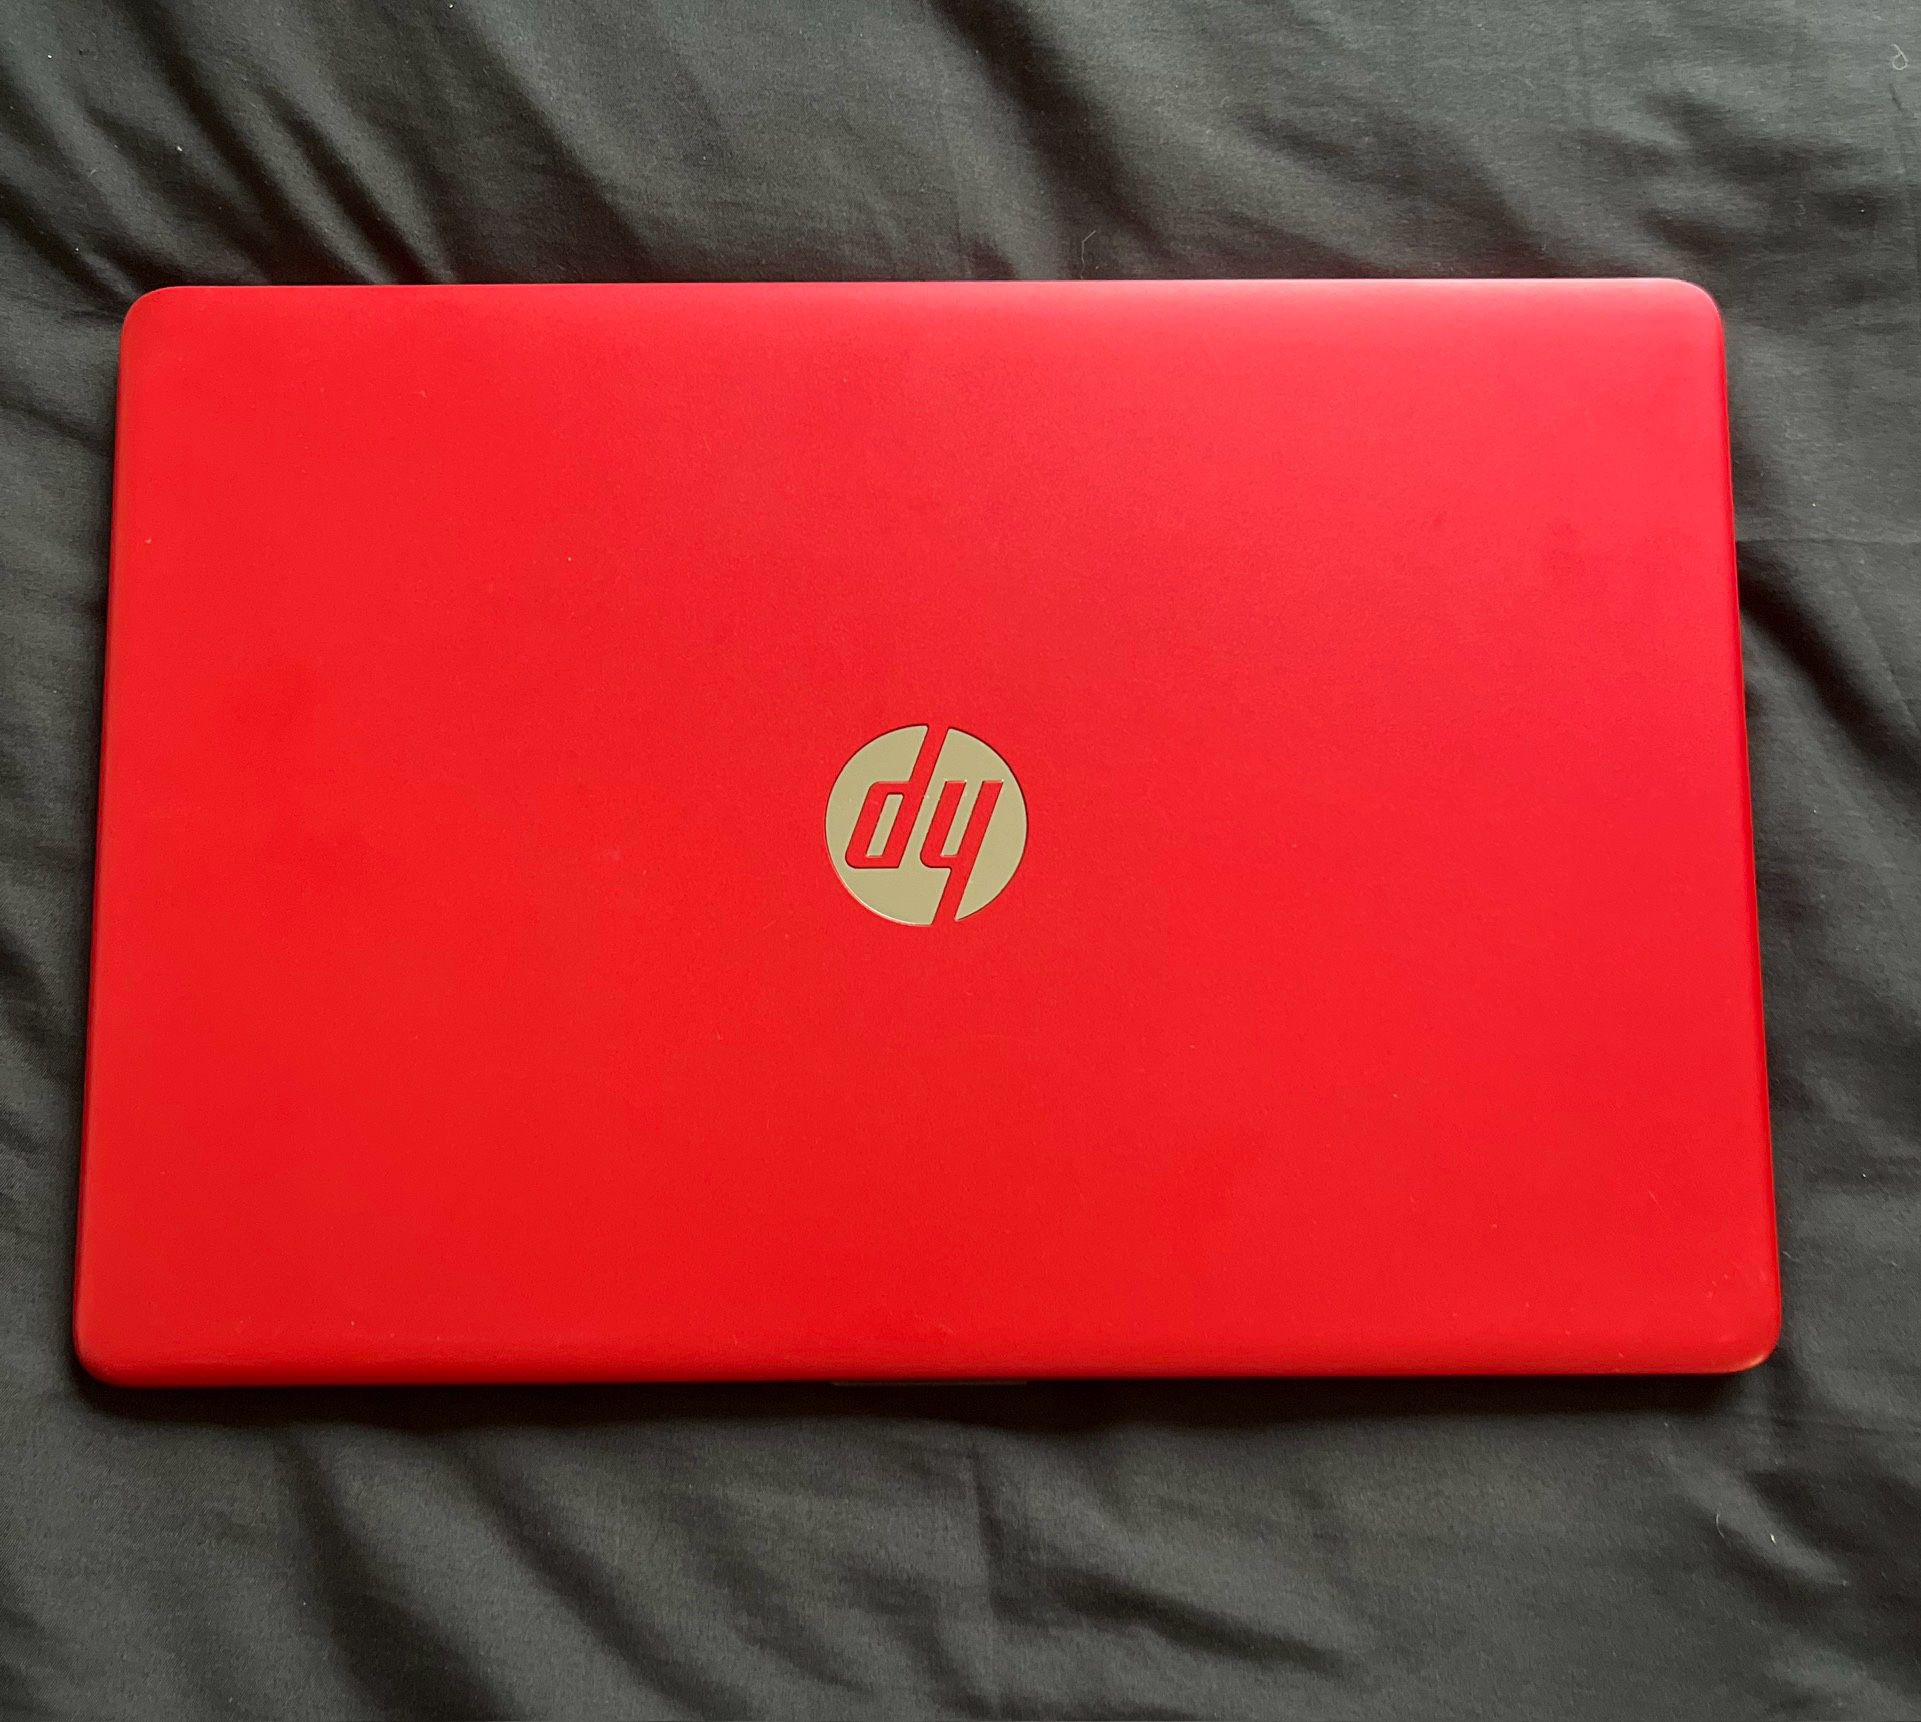 HP Laptop-15 Valentine’s Day Exclusive. With Logitech Camera Specs in Description.